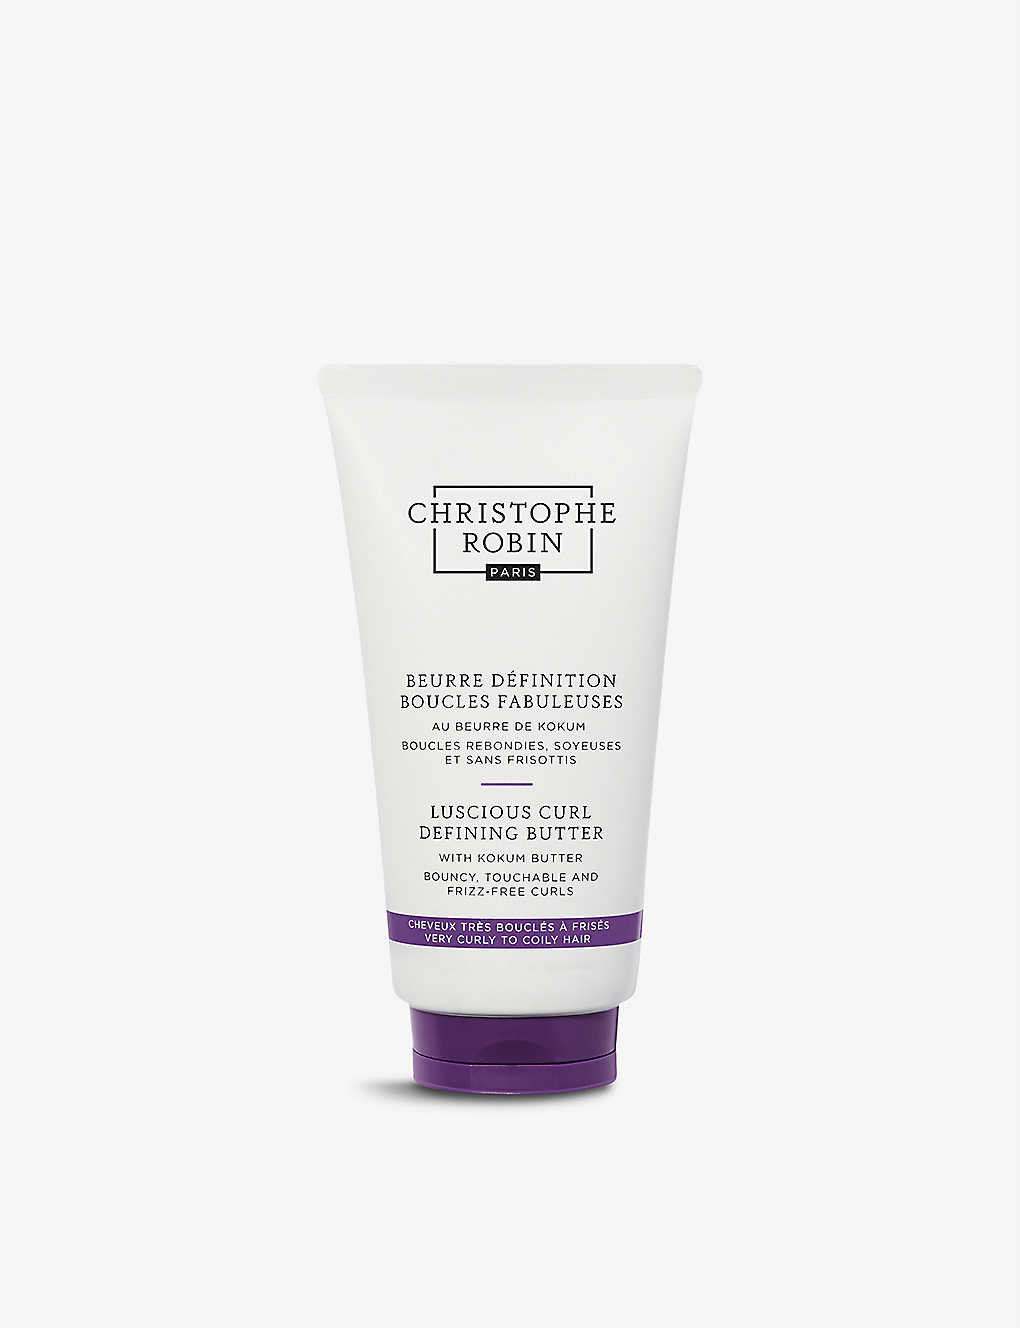 Christophe Robin Luscious Curl Defining Butter 250ml